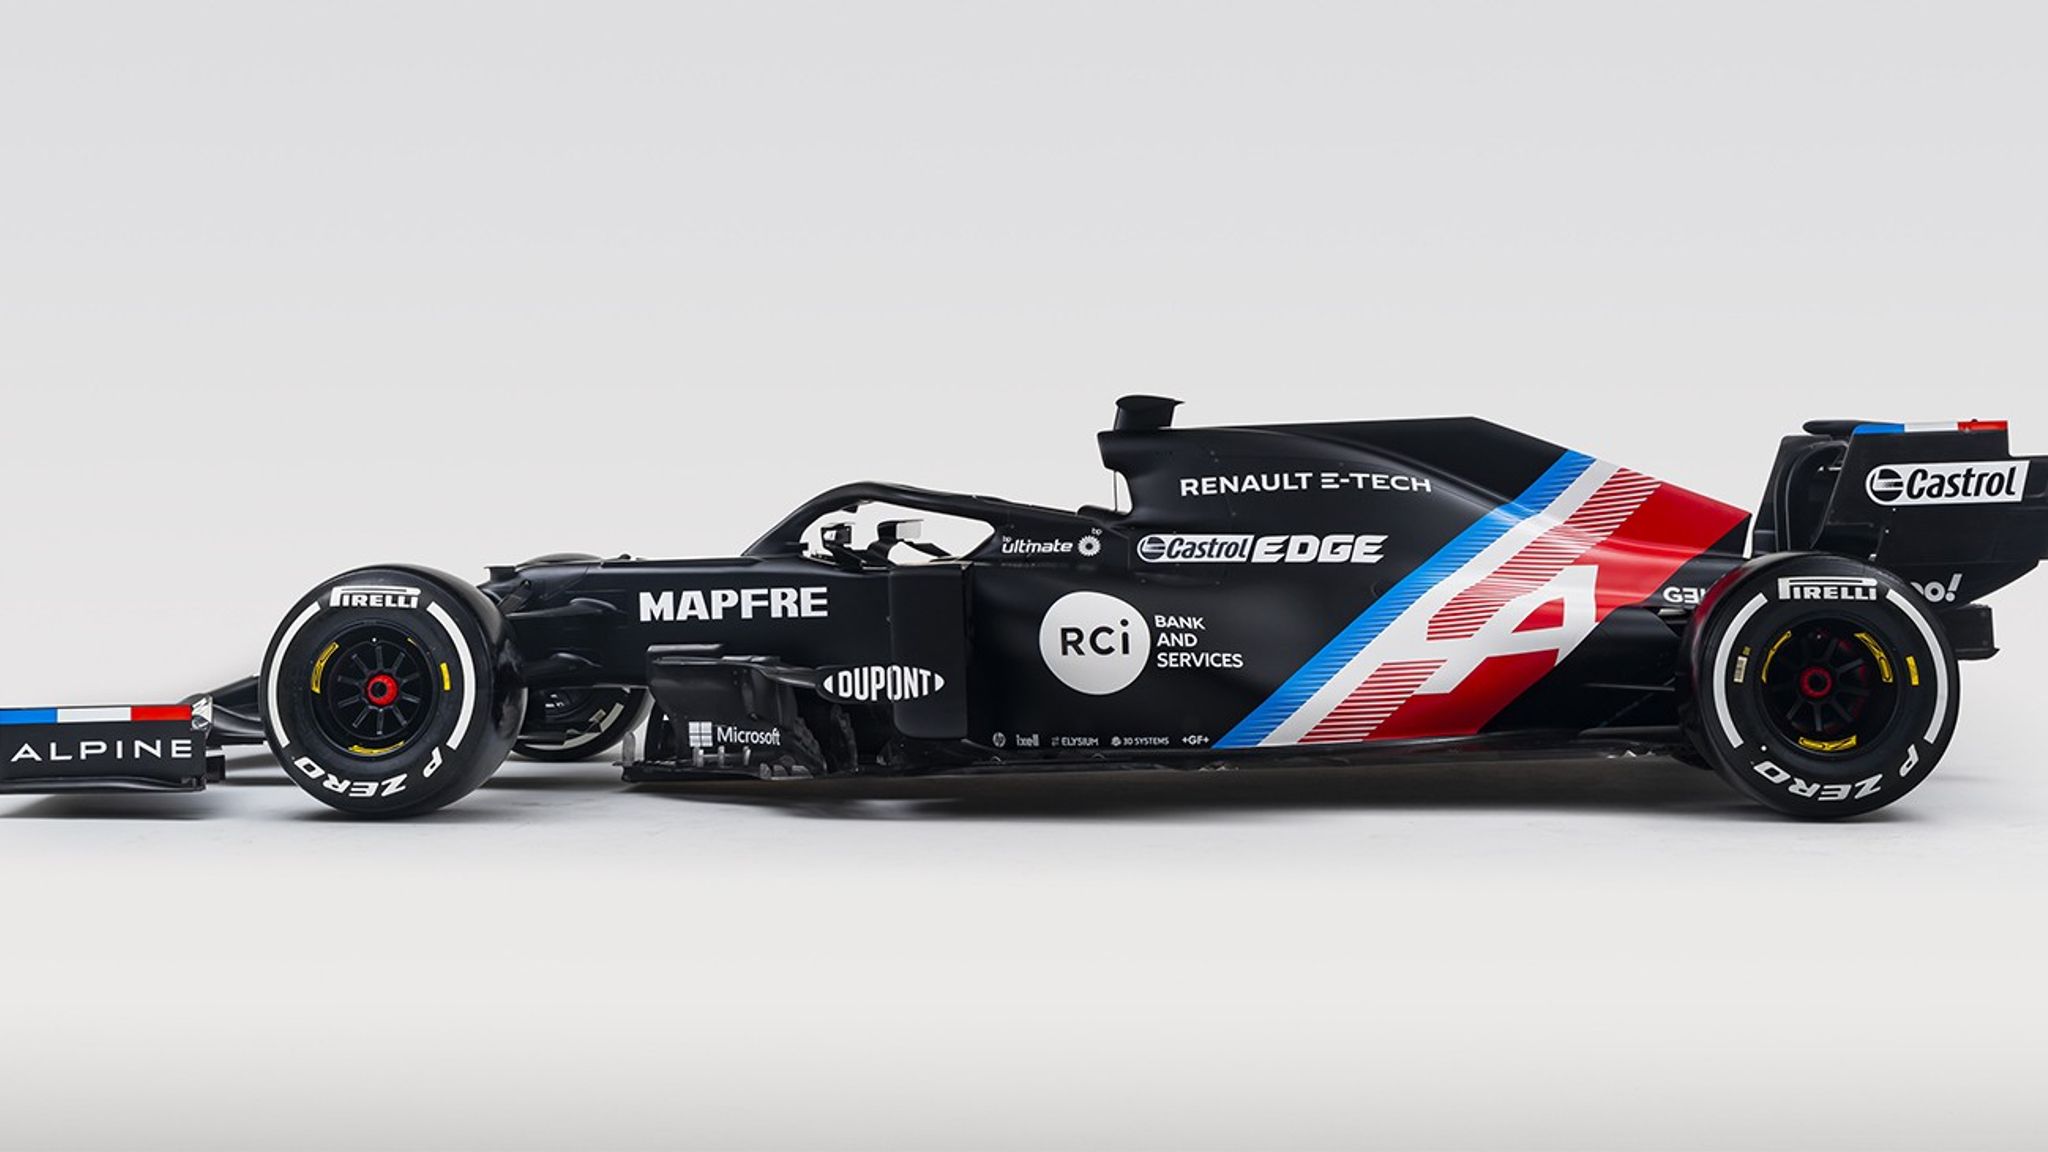 Renault reveal first look at Alpine F1 livery for 2021 rebrand